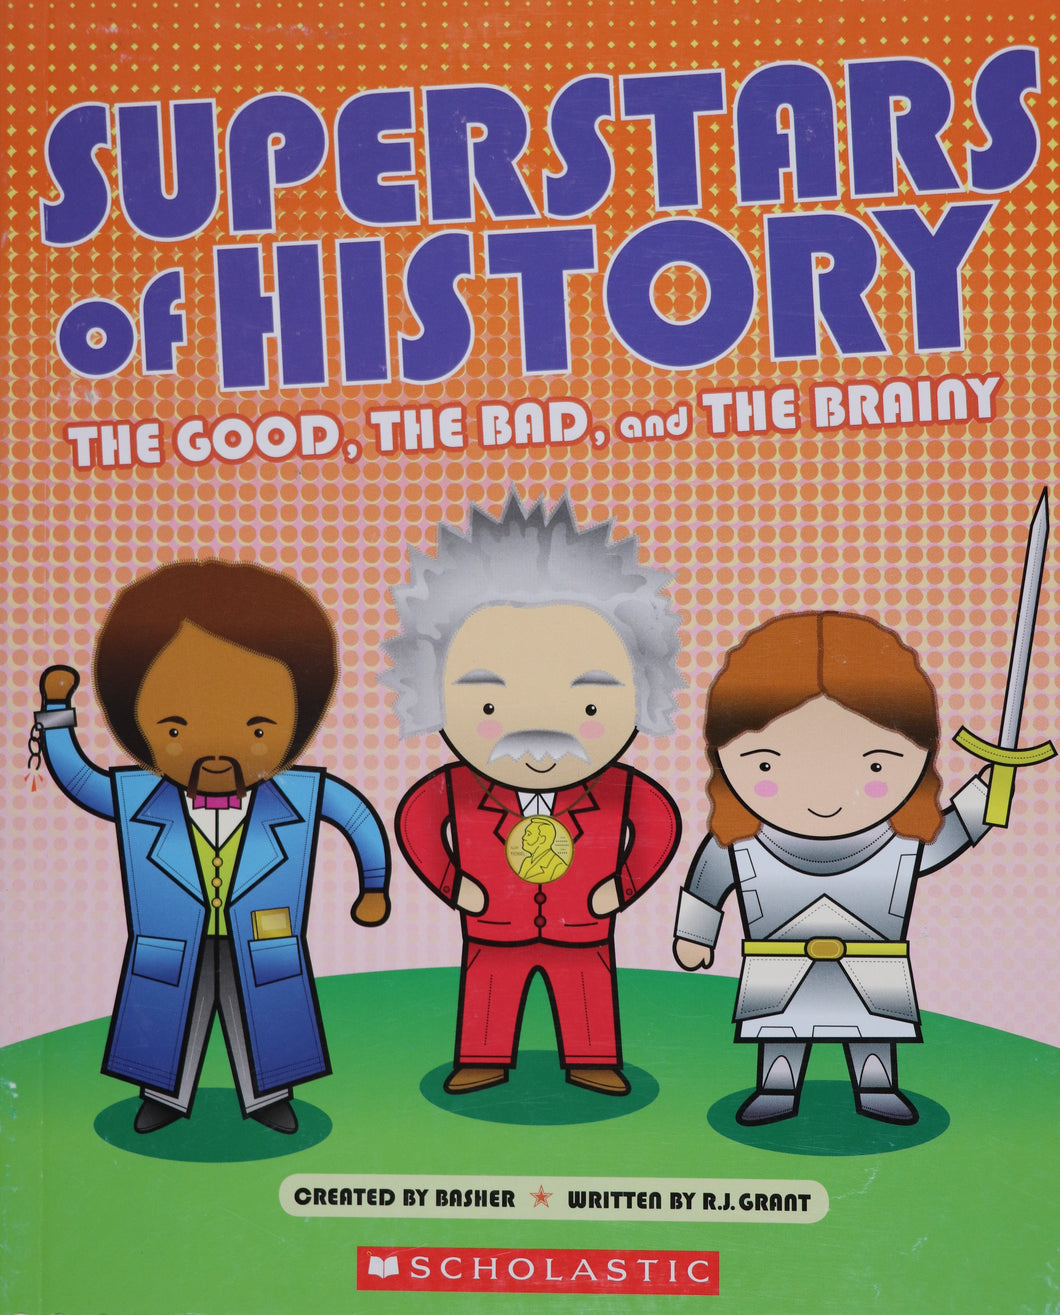 Superstars of History: the Good , the Bad, and the Brainy